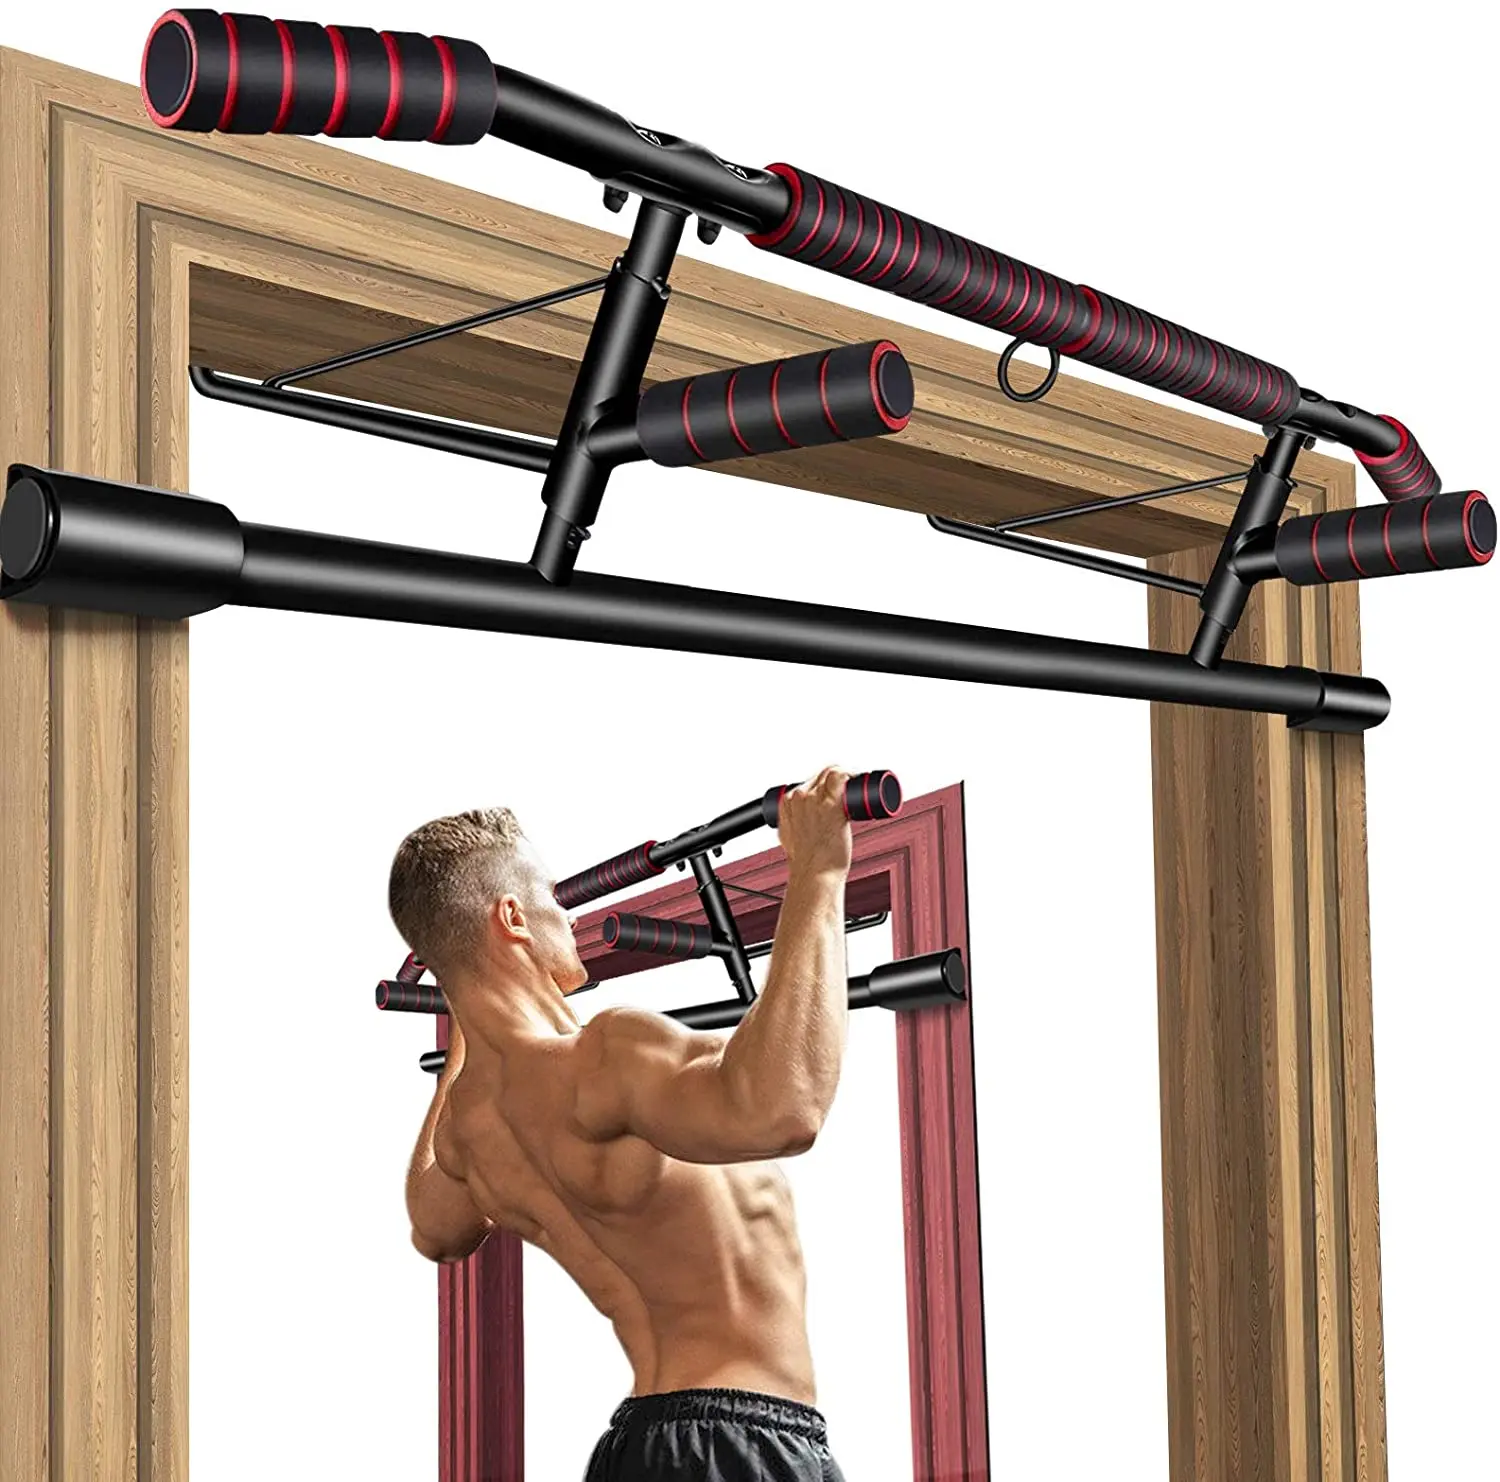 Folding Door Bar KAILUN Chin Up Bar Pull-Up Device Including Dip Bar & Power Ropes Three Sizes Secure Door Frame Assembly at Home Without Screws 